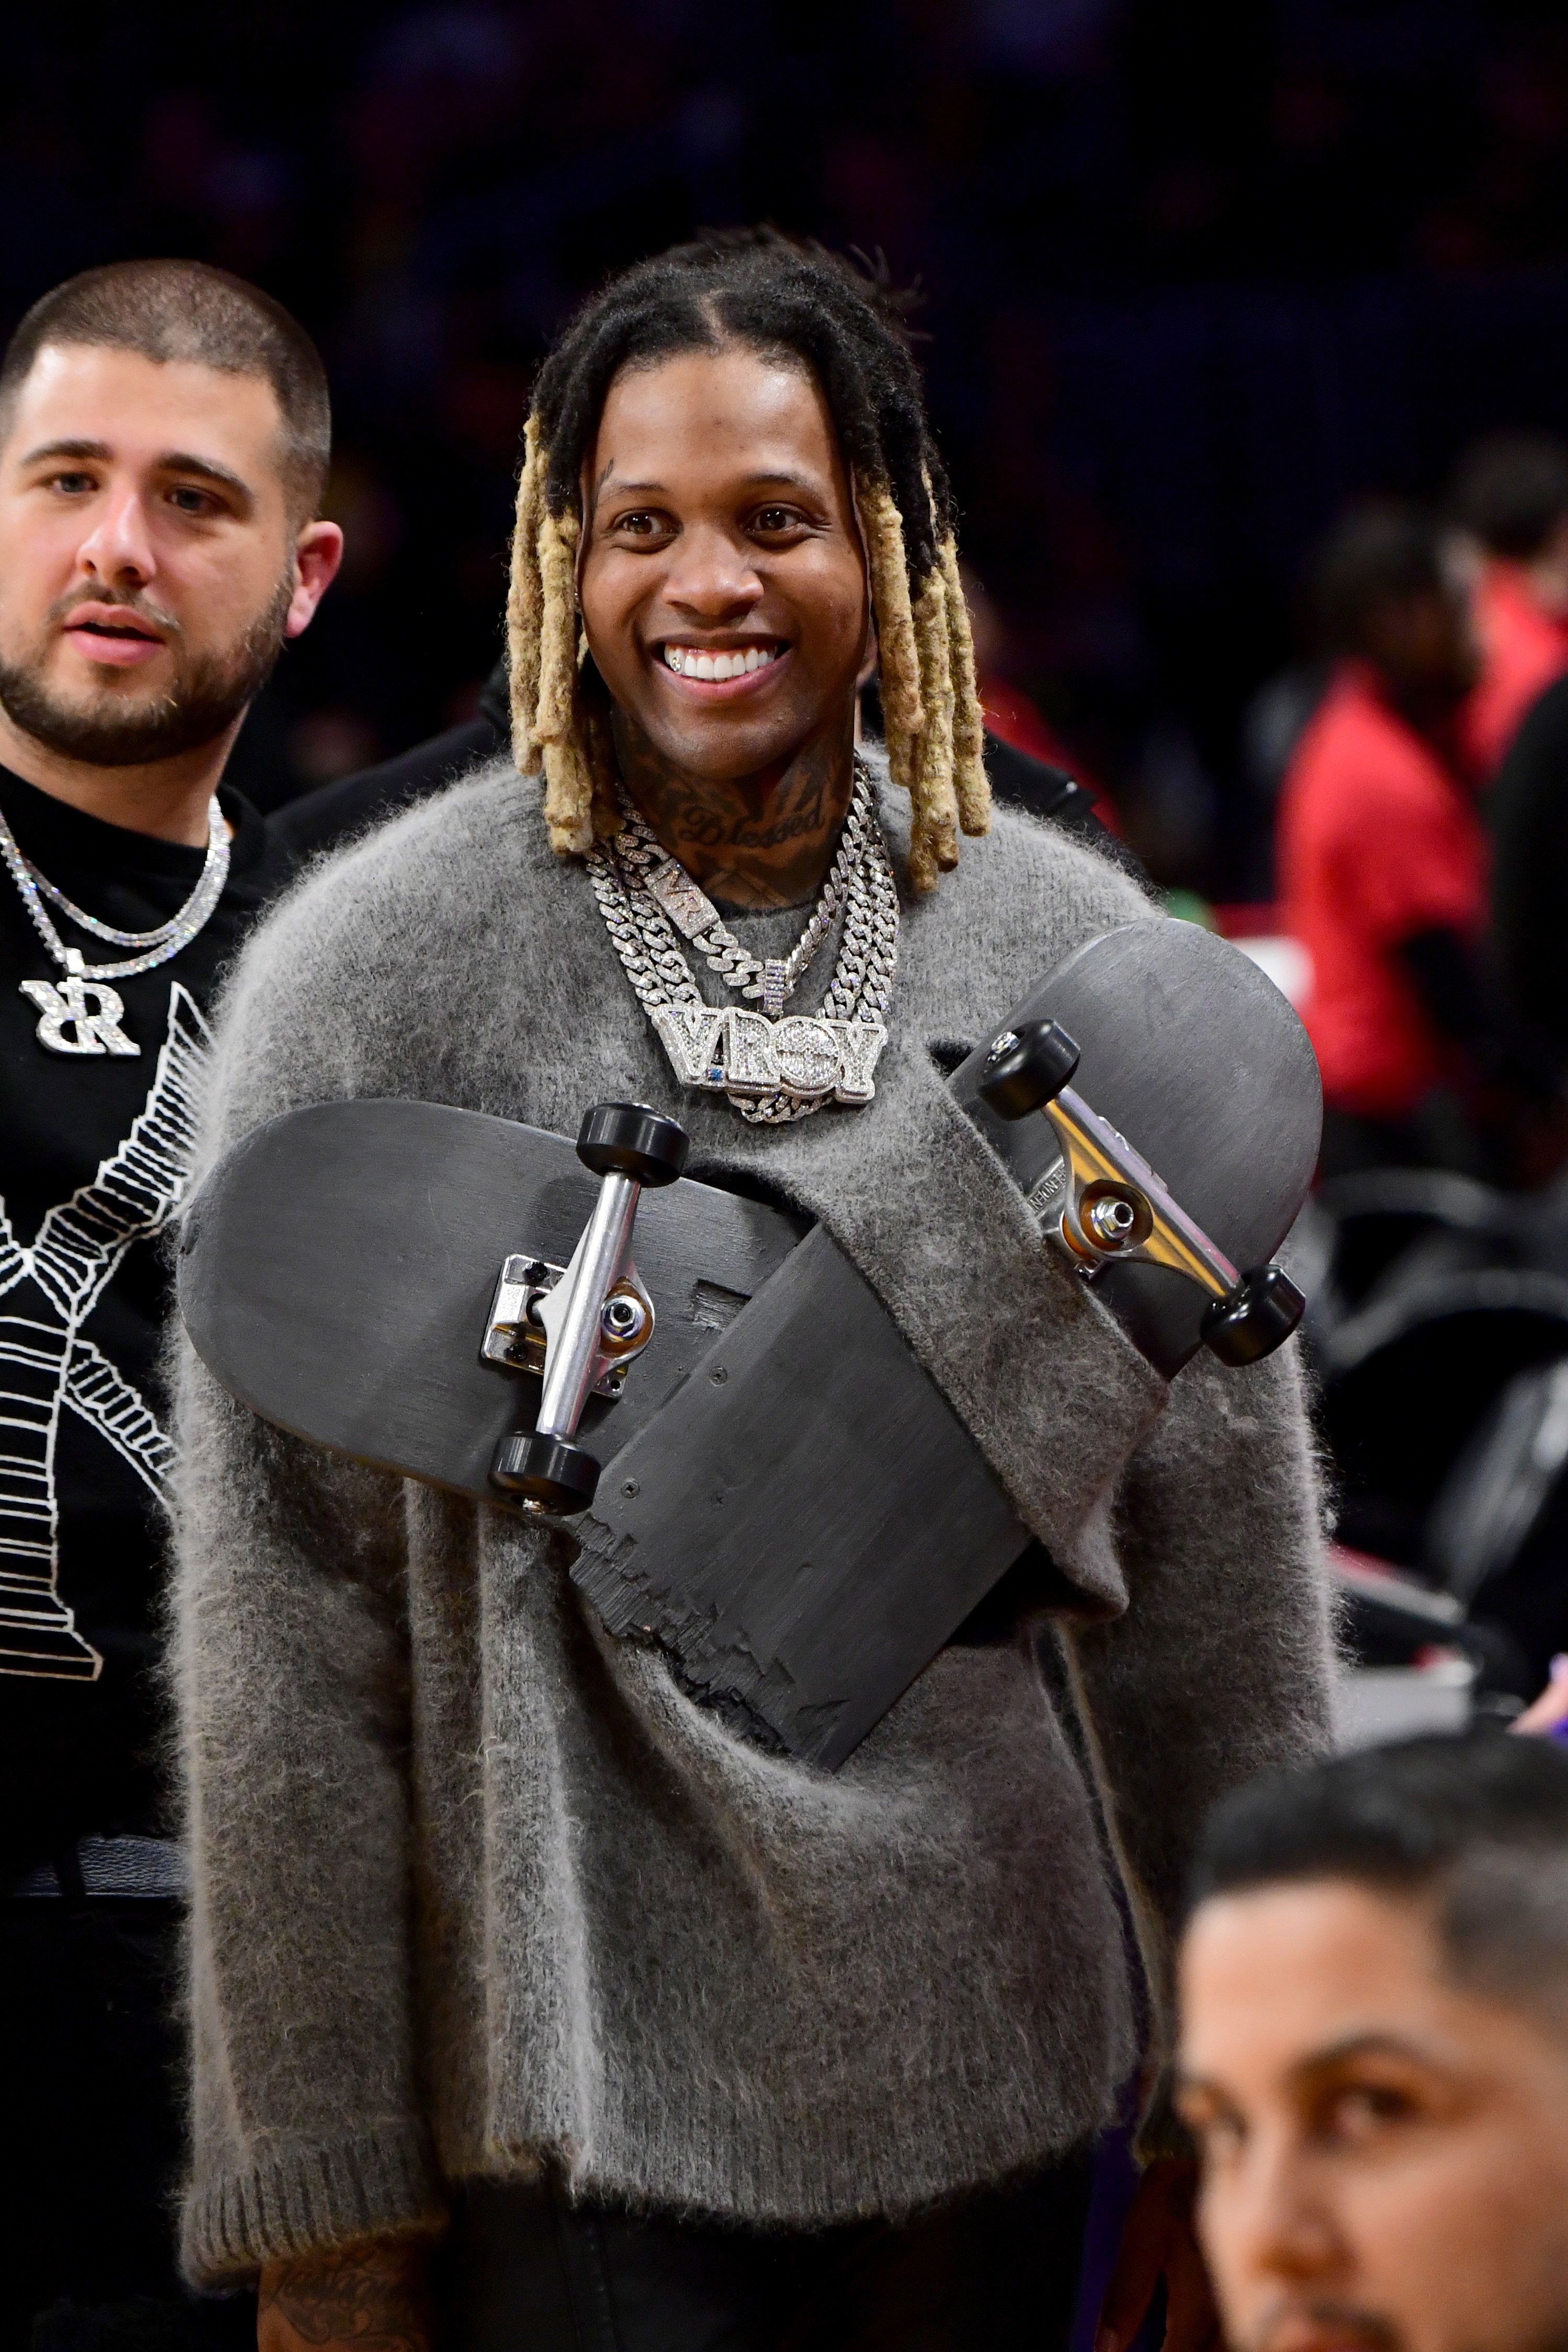 lil durk smiling in the sweater with the broken skateboard attached